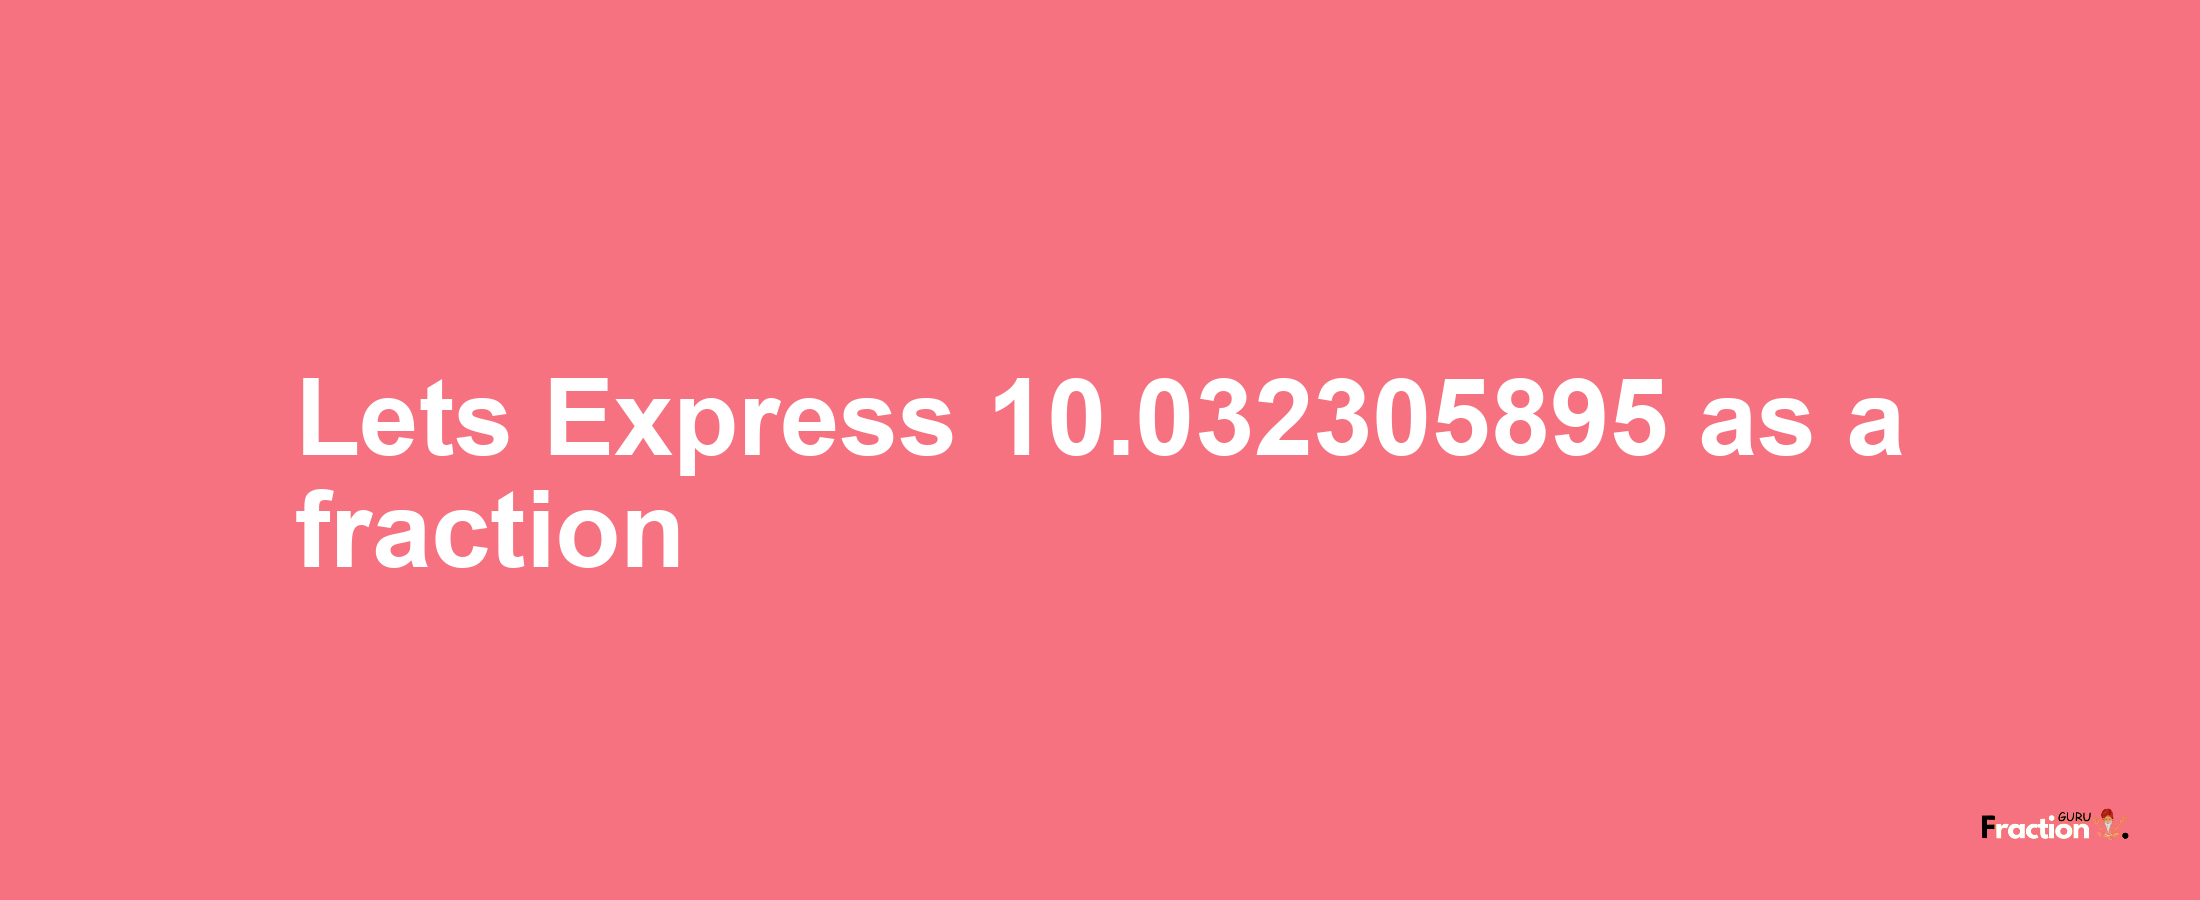 Lets Express 10.032305895 as afraction